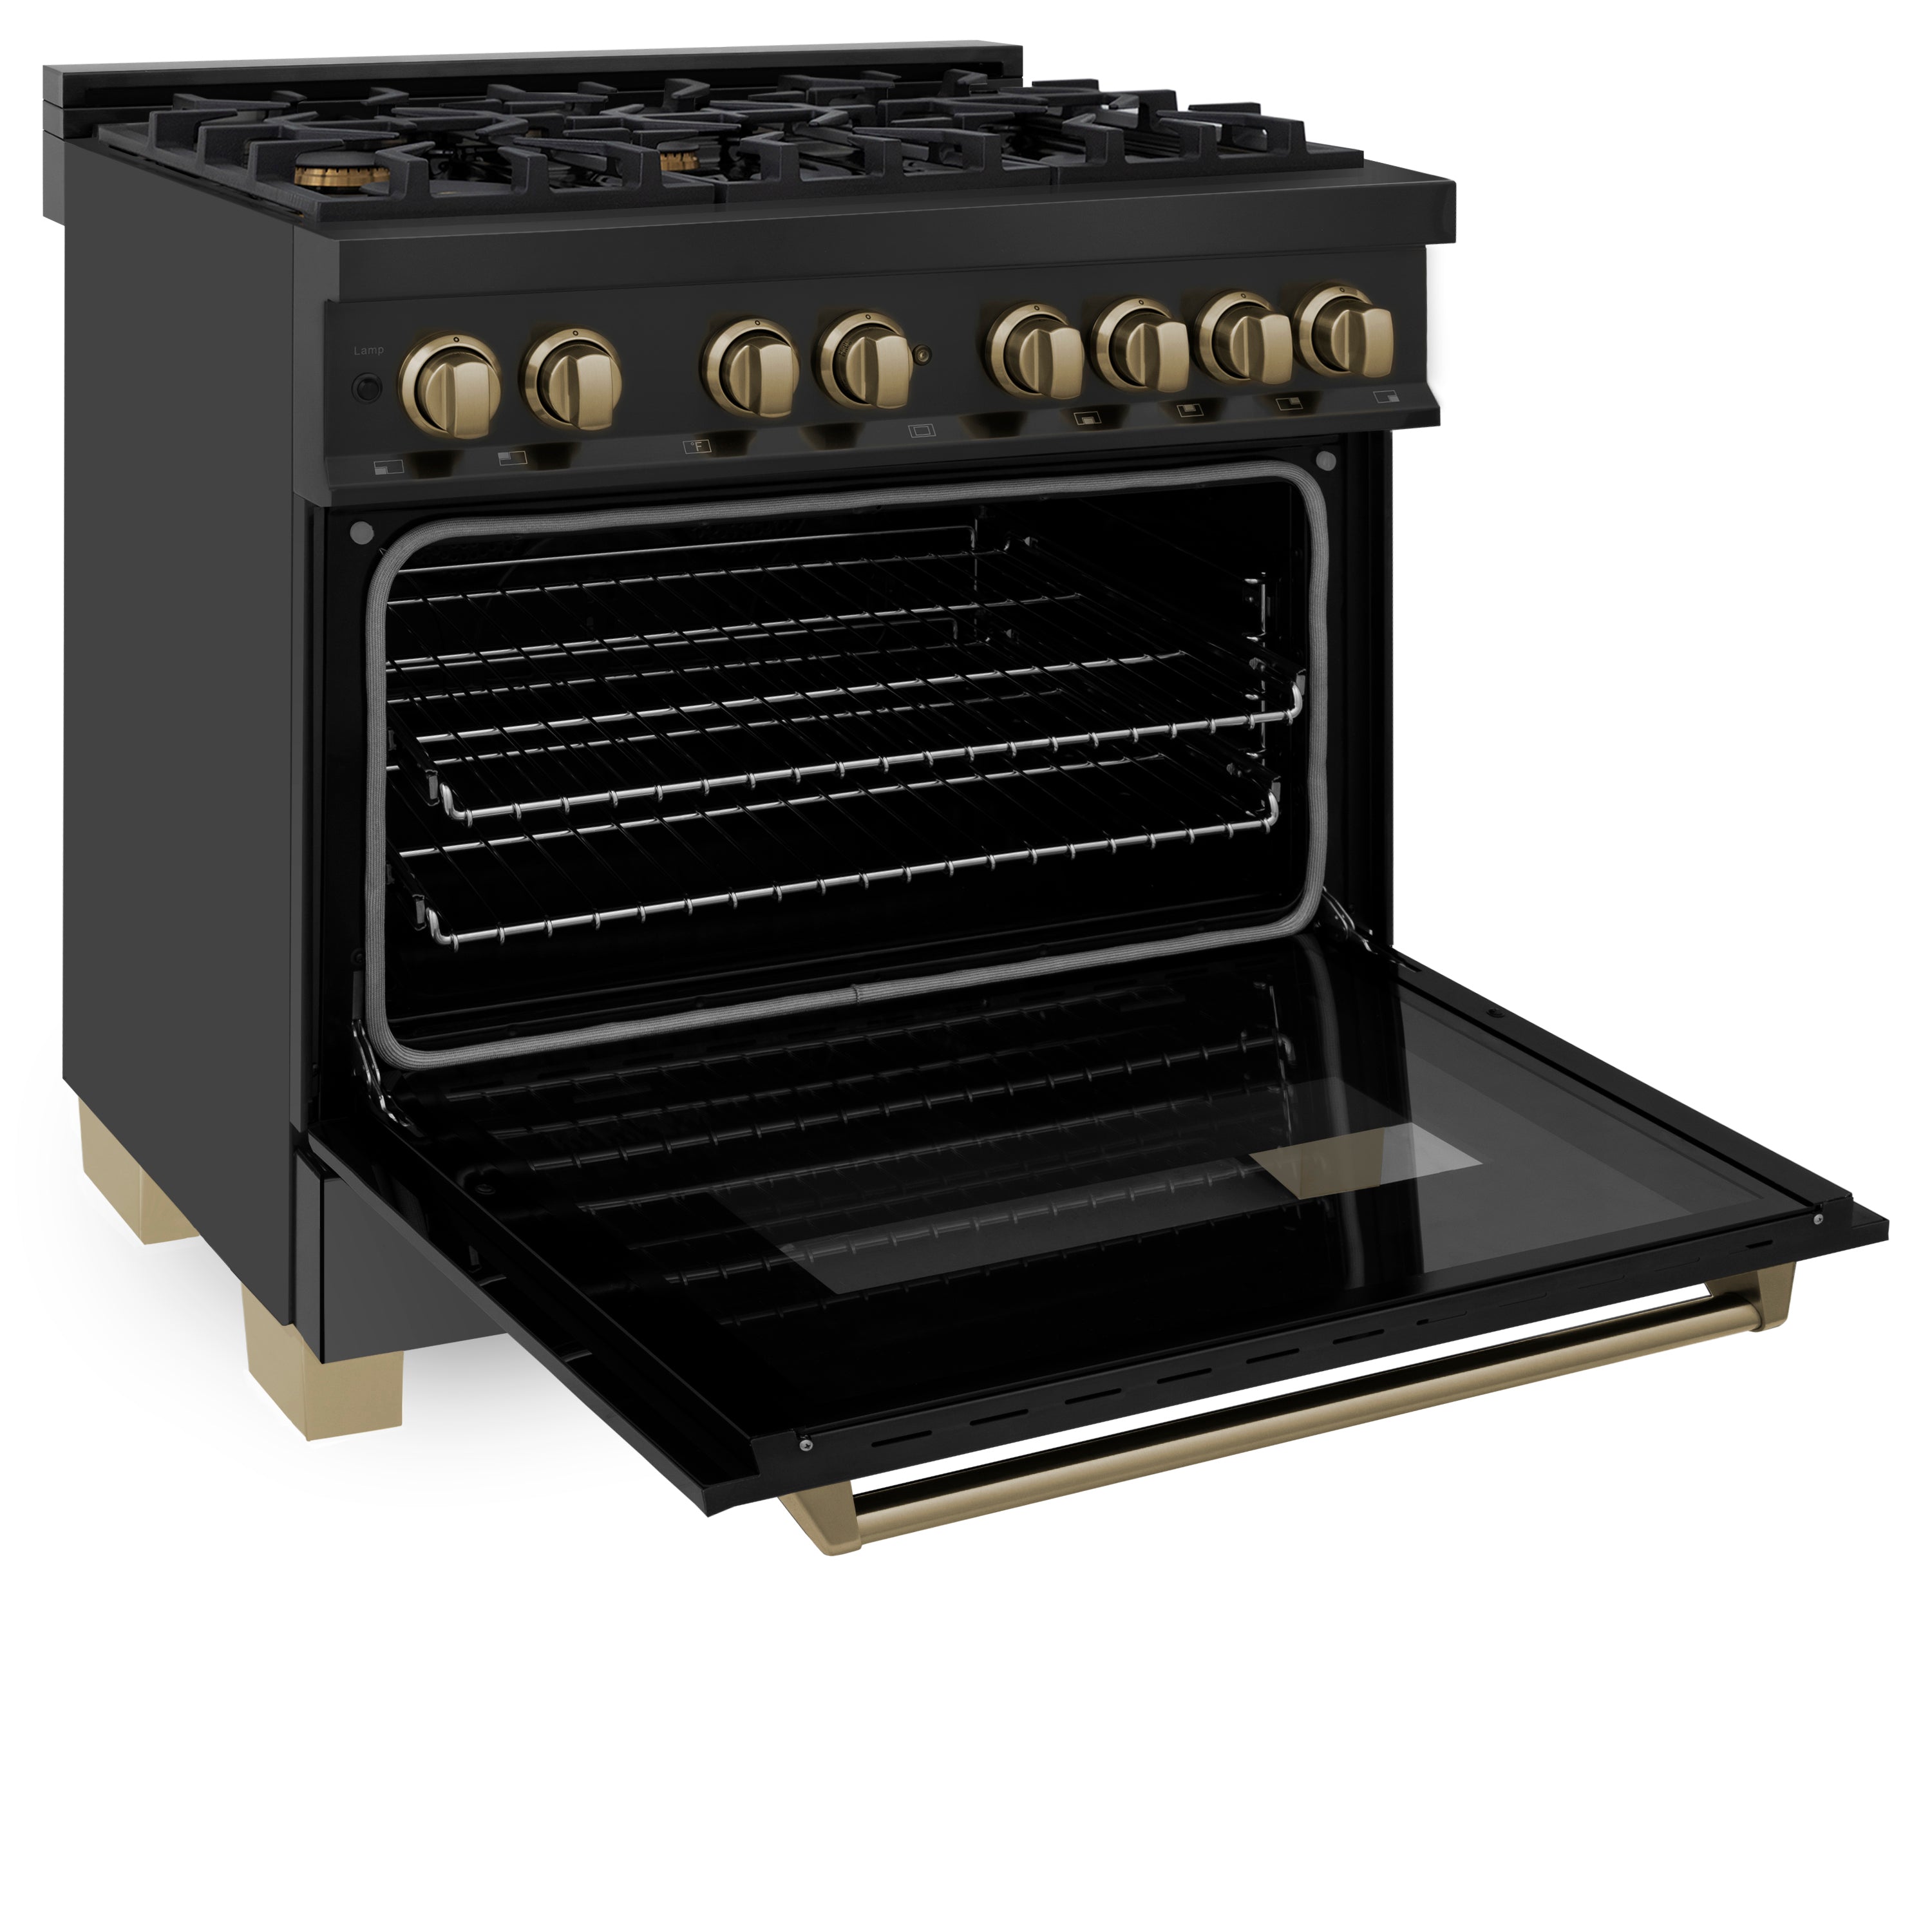 ZLINE Autograph Edition 36" 4.6 cu. ft. Dual Fuel Range with Gas Stove and Electric Oven in Black Stainless Steel with Champagne Bronze Accents (RABZ-36-CB)